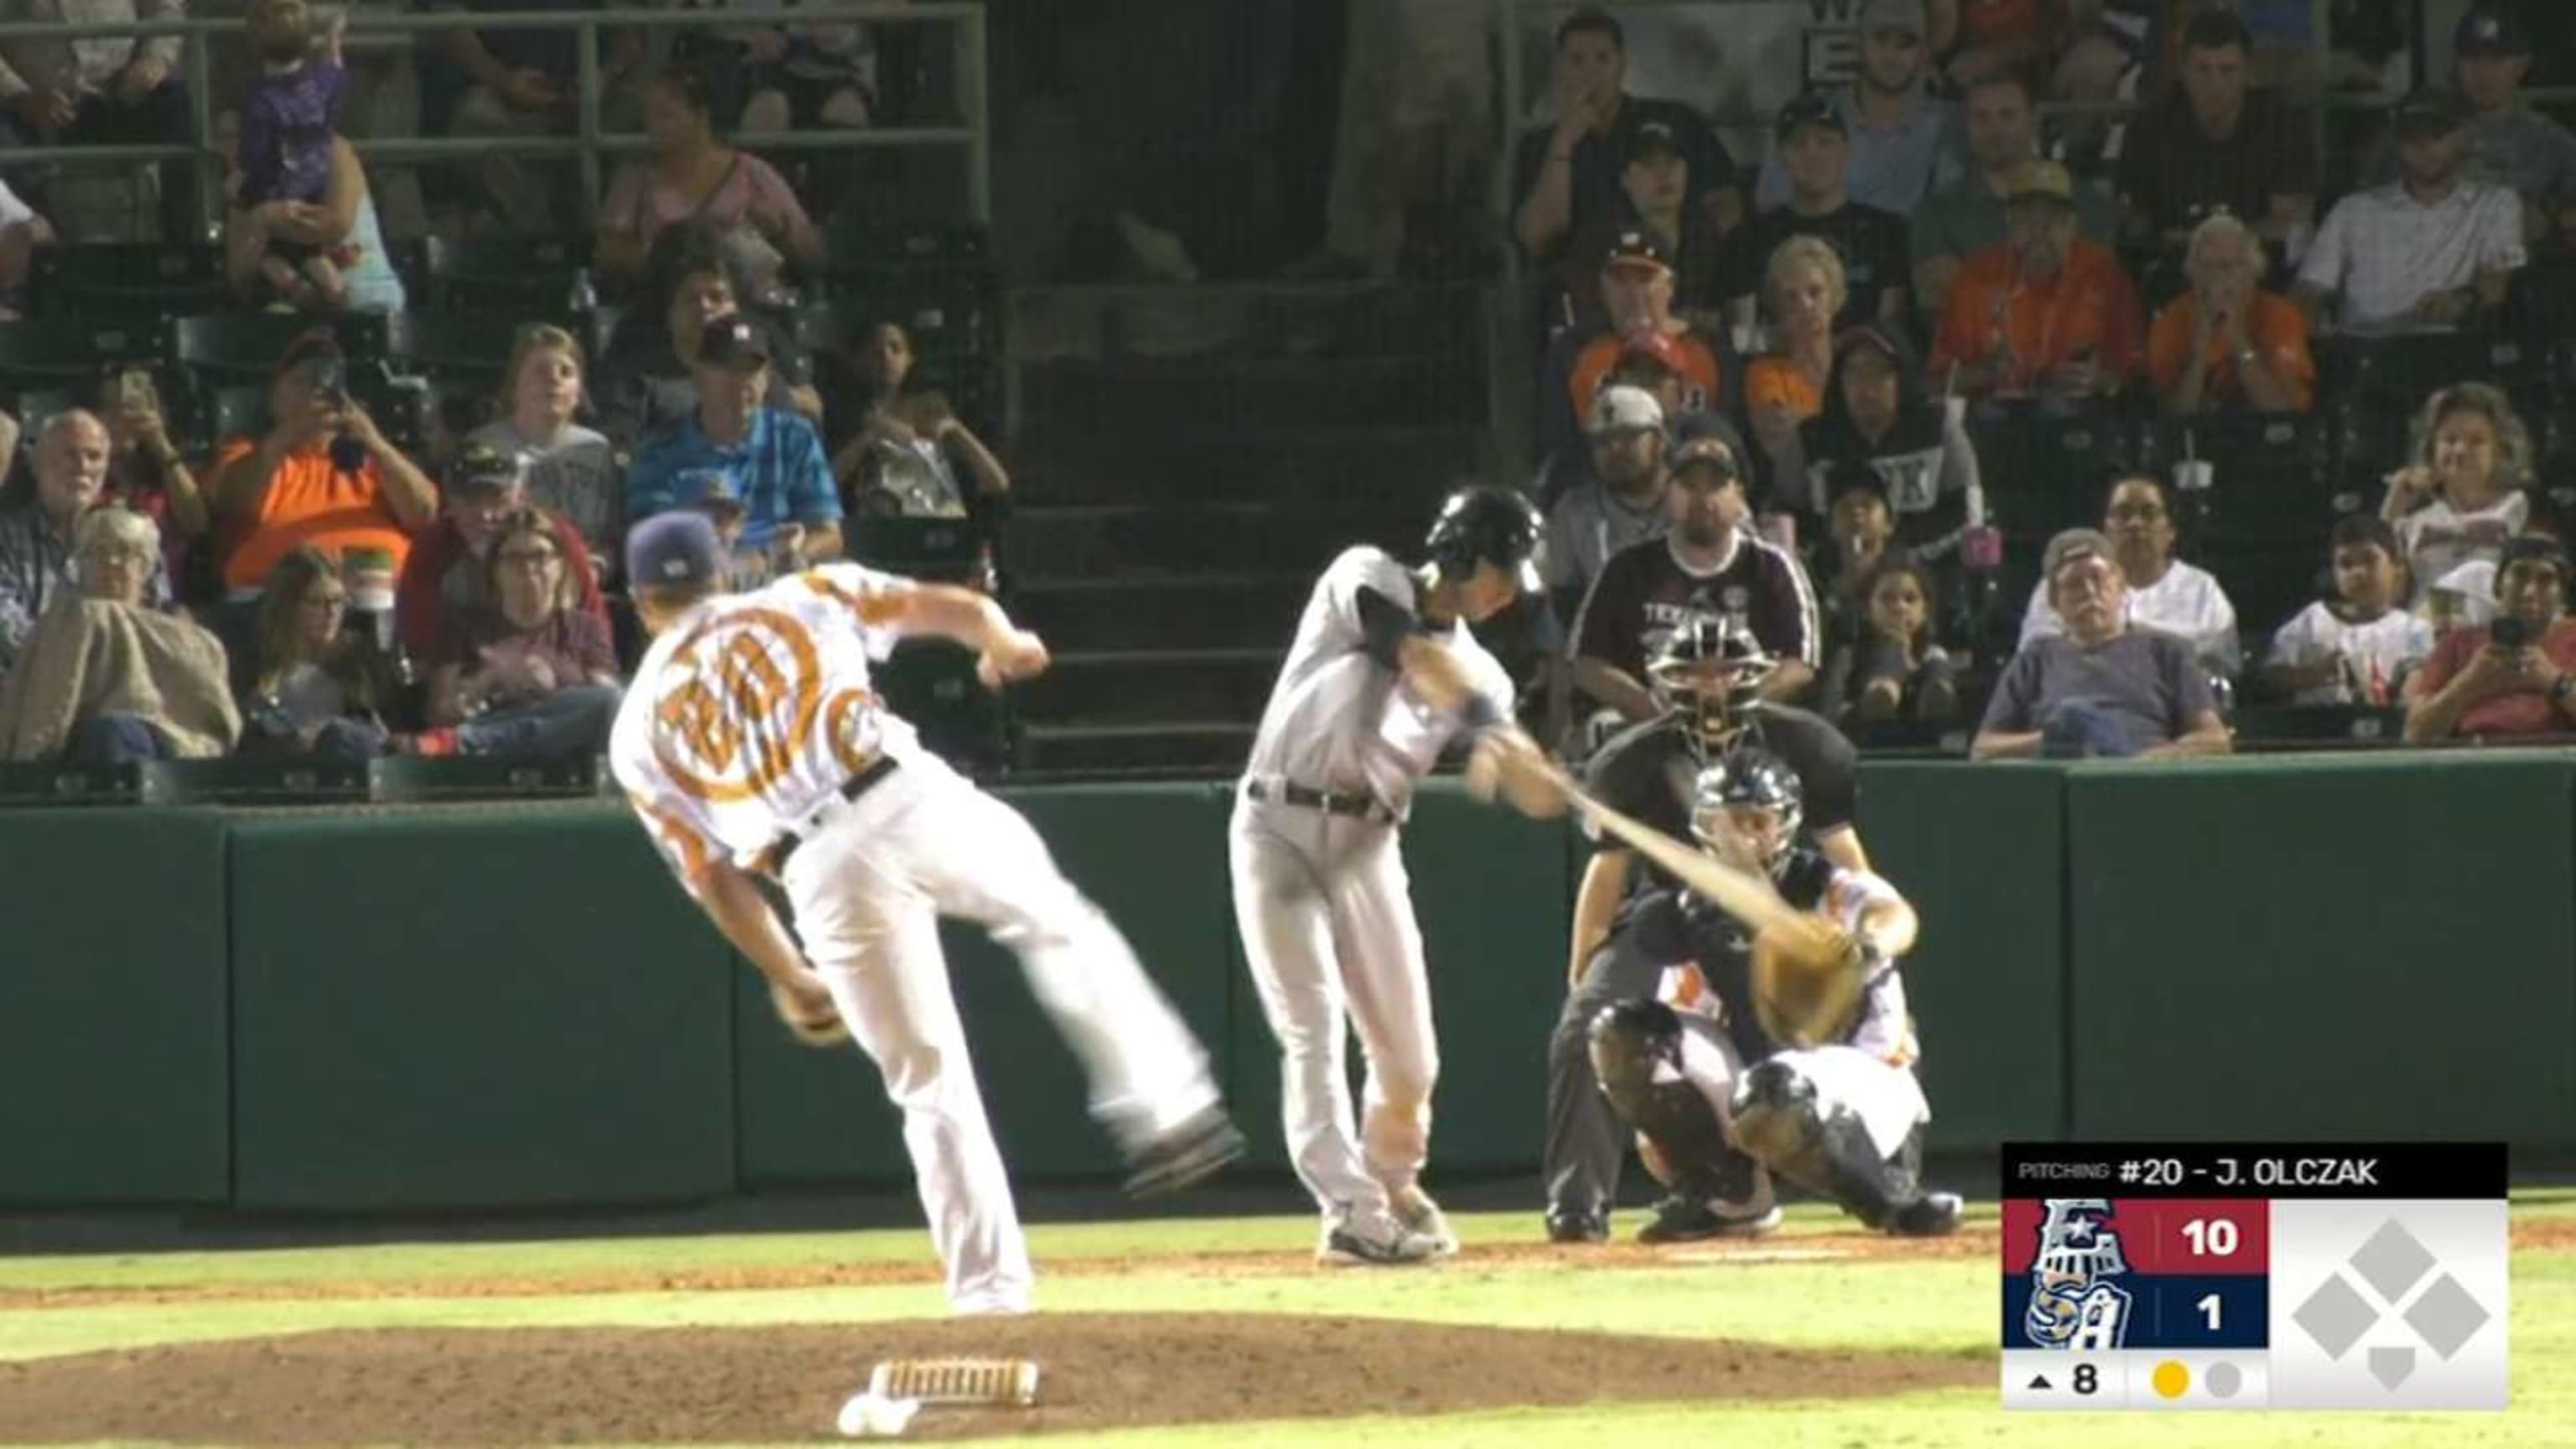 Houston Astros' Kyle Tucker homers to cap four-hit night in PCL